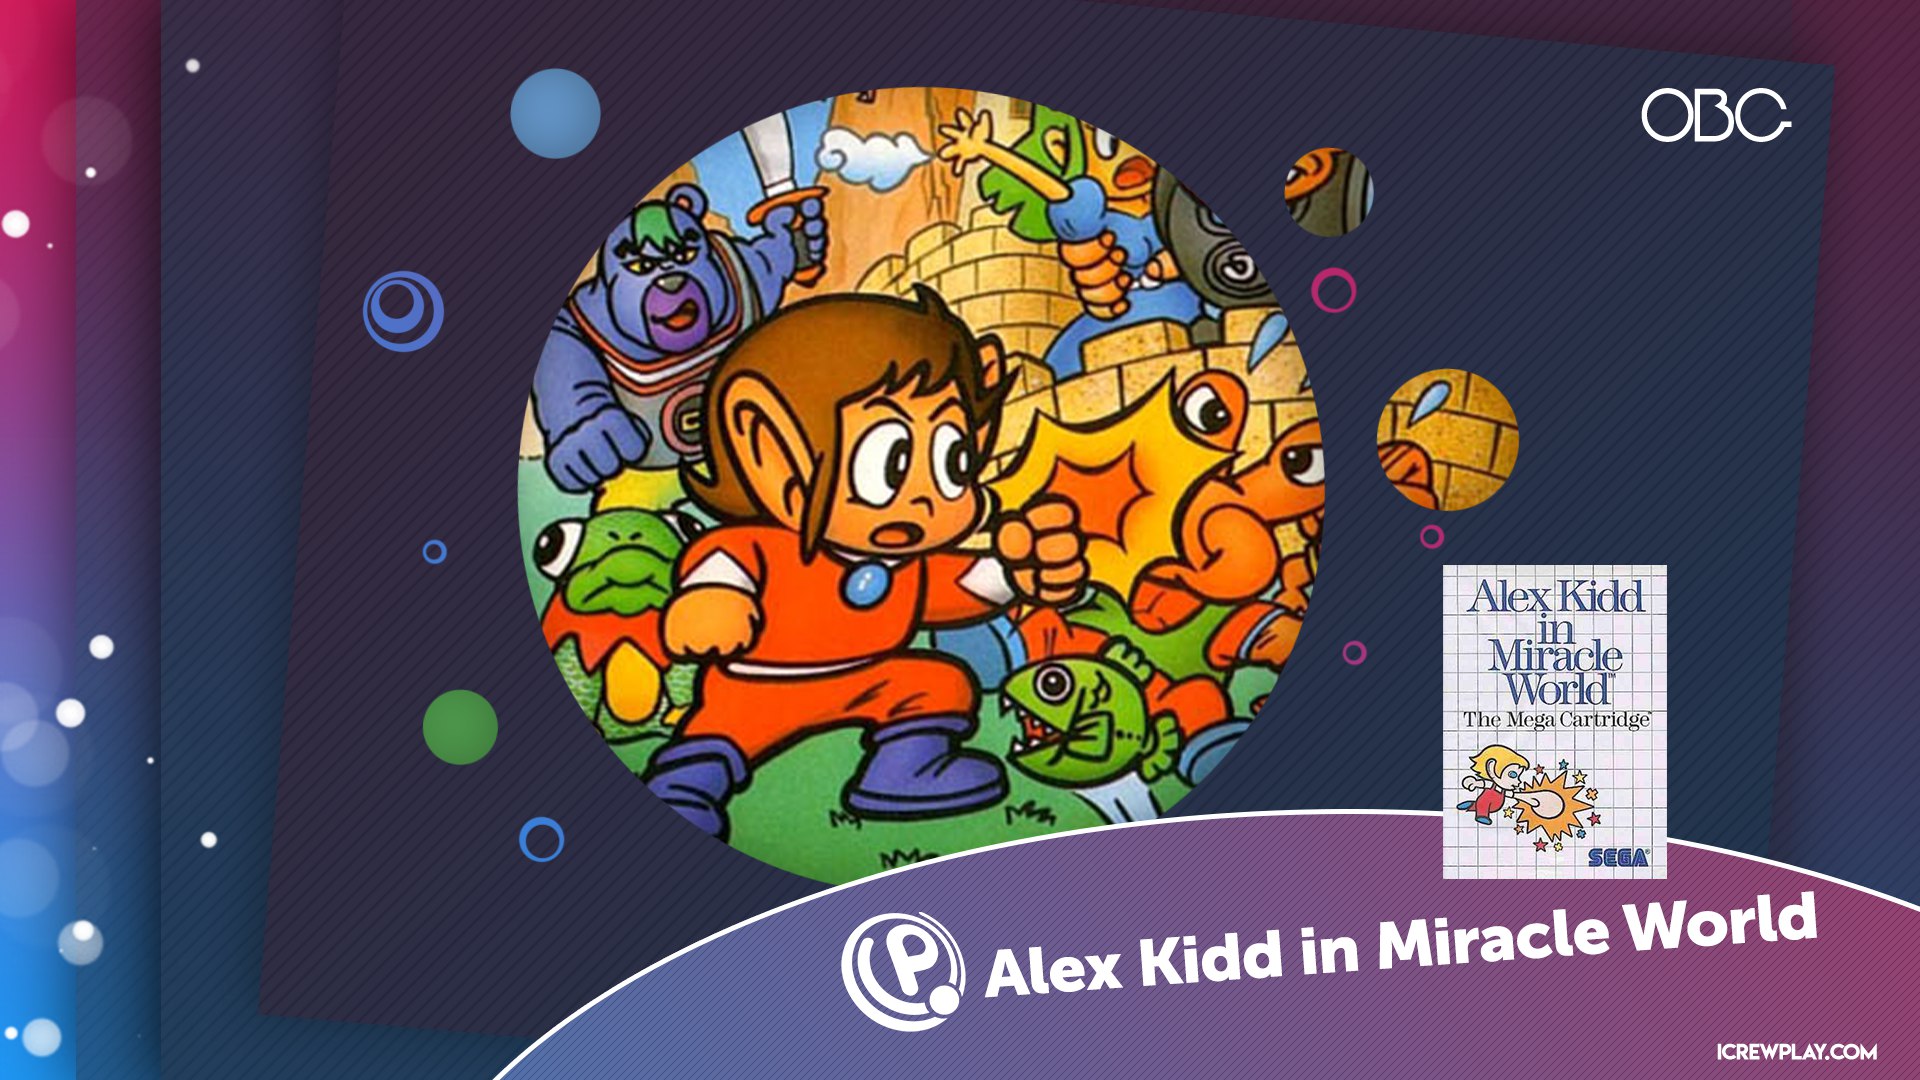 Old But Gold #67 - Alex Kidd in The Miracle World 2